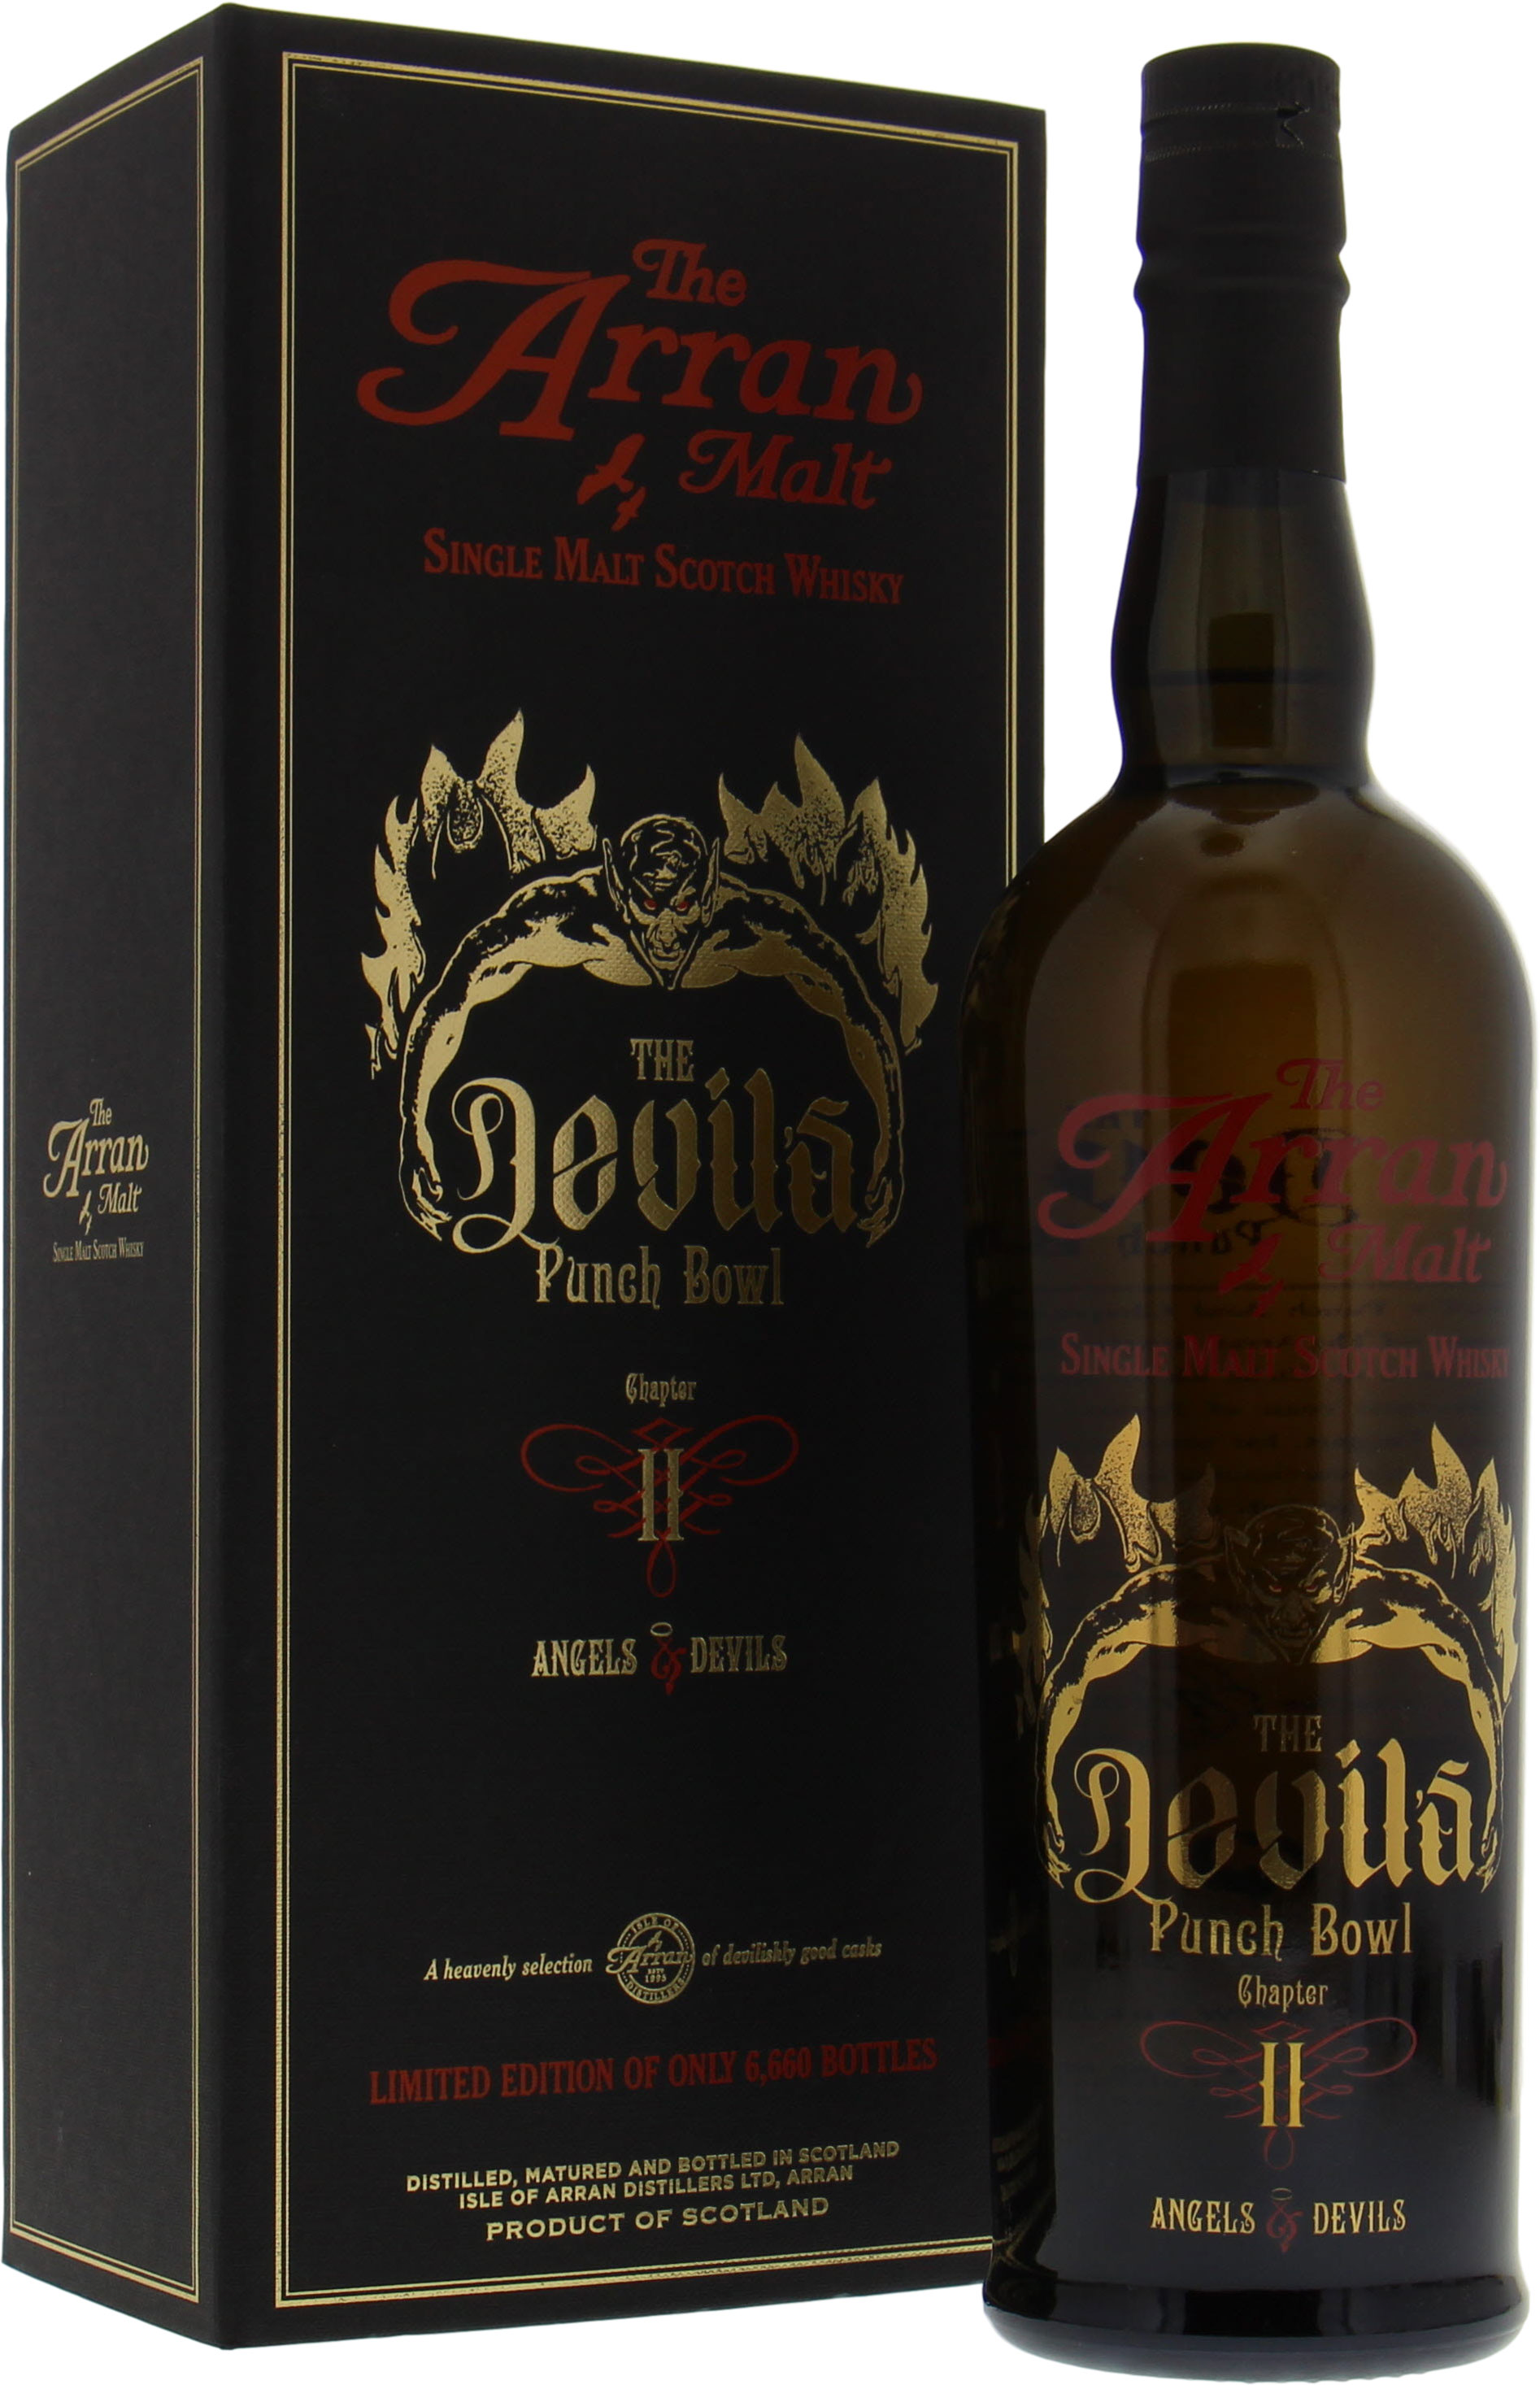 Arran - The Devil's Punch Bowl Chapter 2 53.1% NV In Original Container